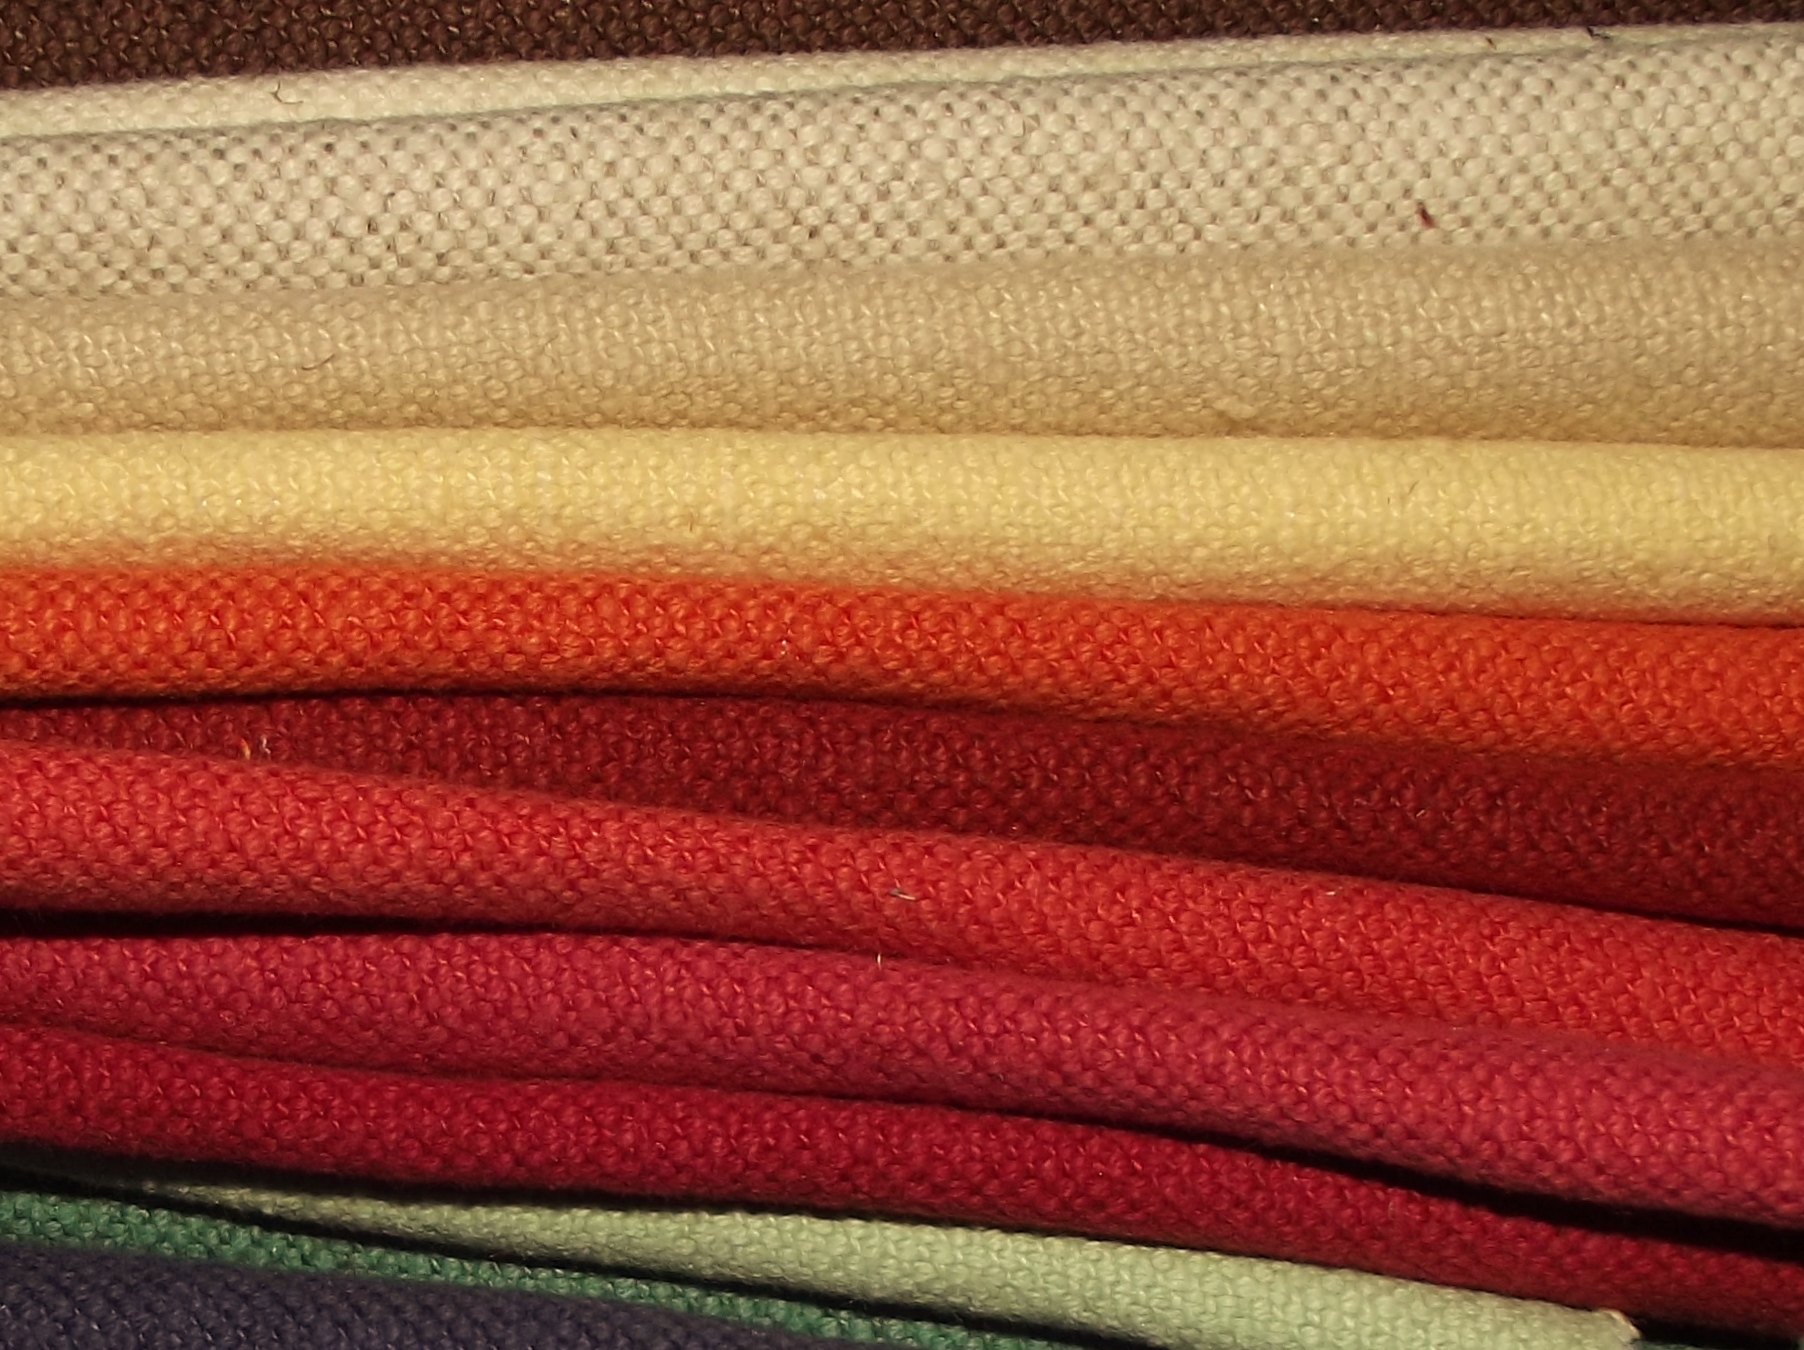 Ross Fabrics - A leading supplier of Upholstery Fabrics to the ...